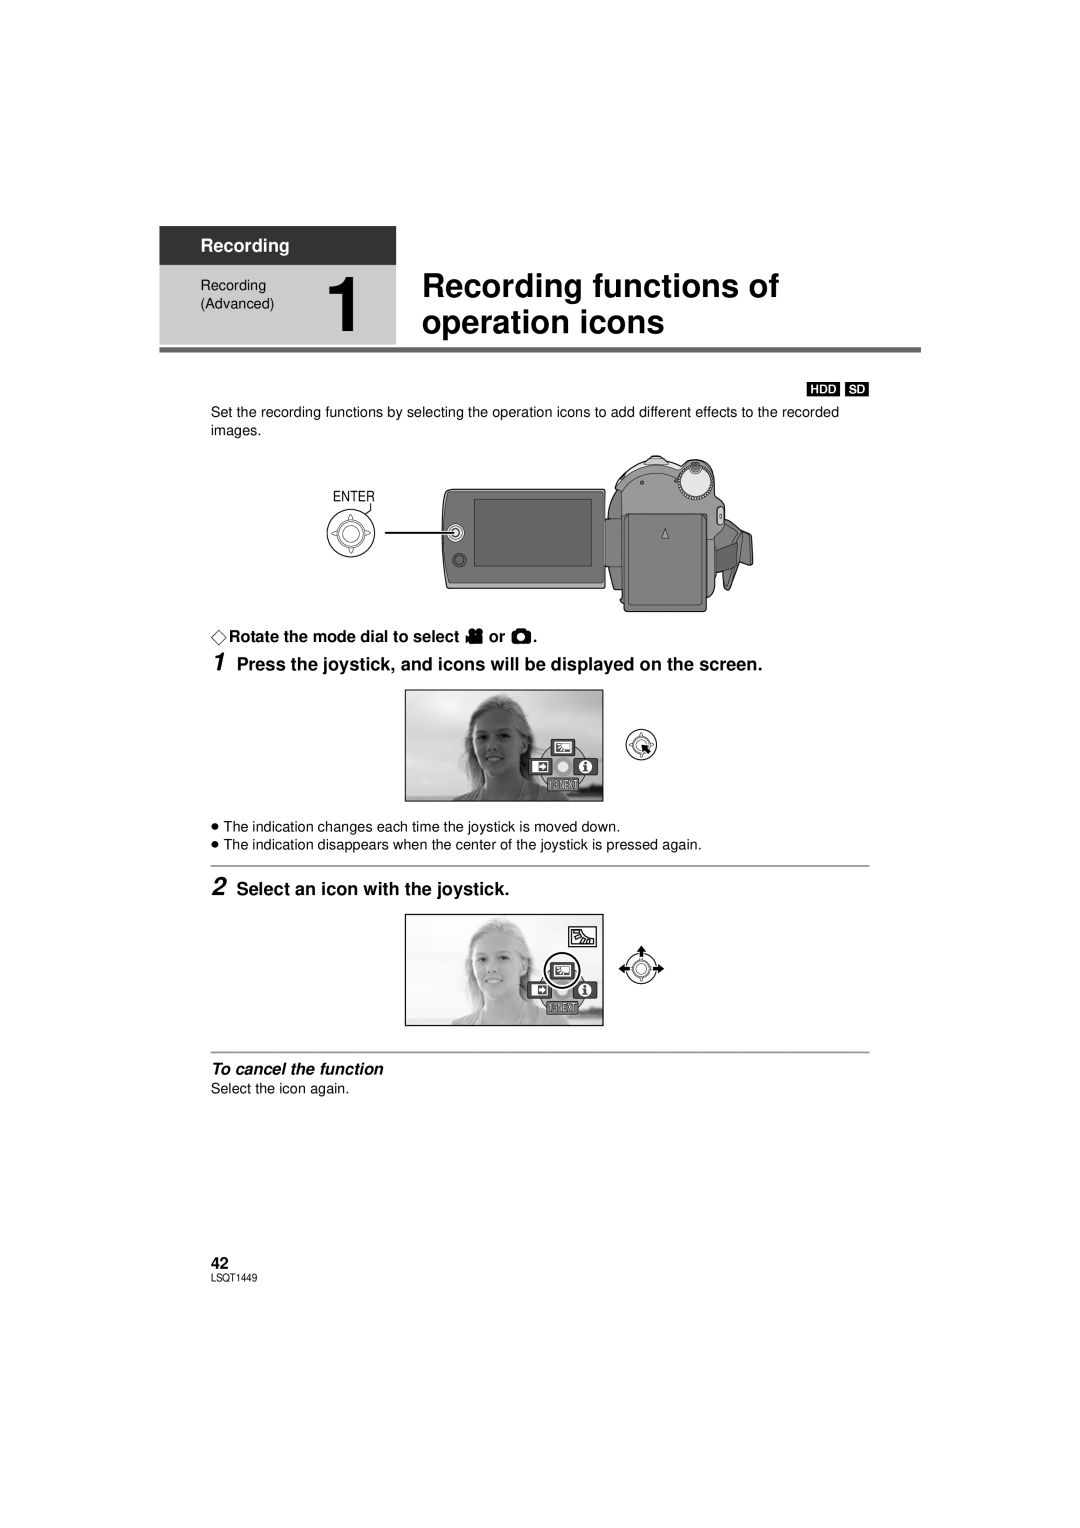 Panasonic SDR-H80P Recording functions of, operation icons, Press the joystick, and icons will be displayed on the screen 